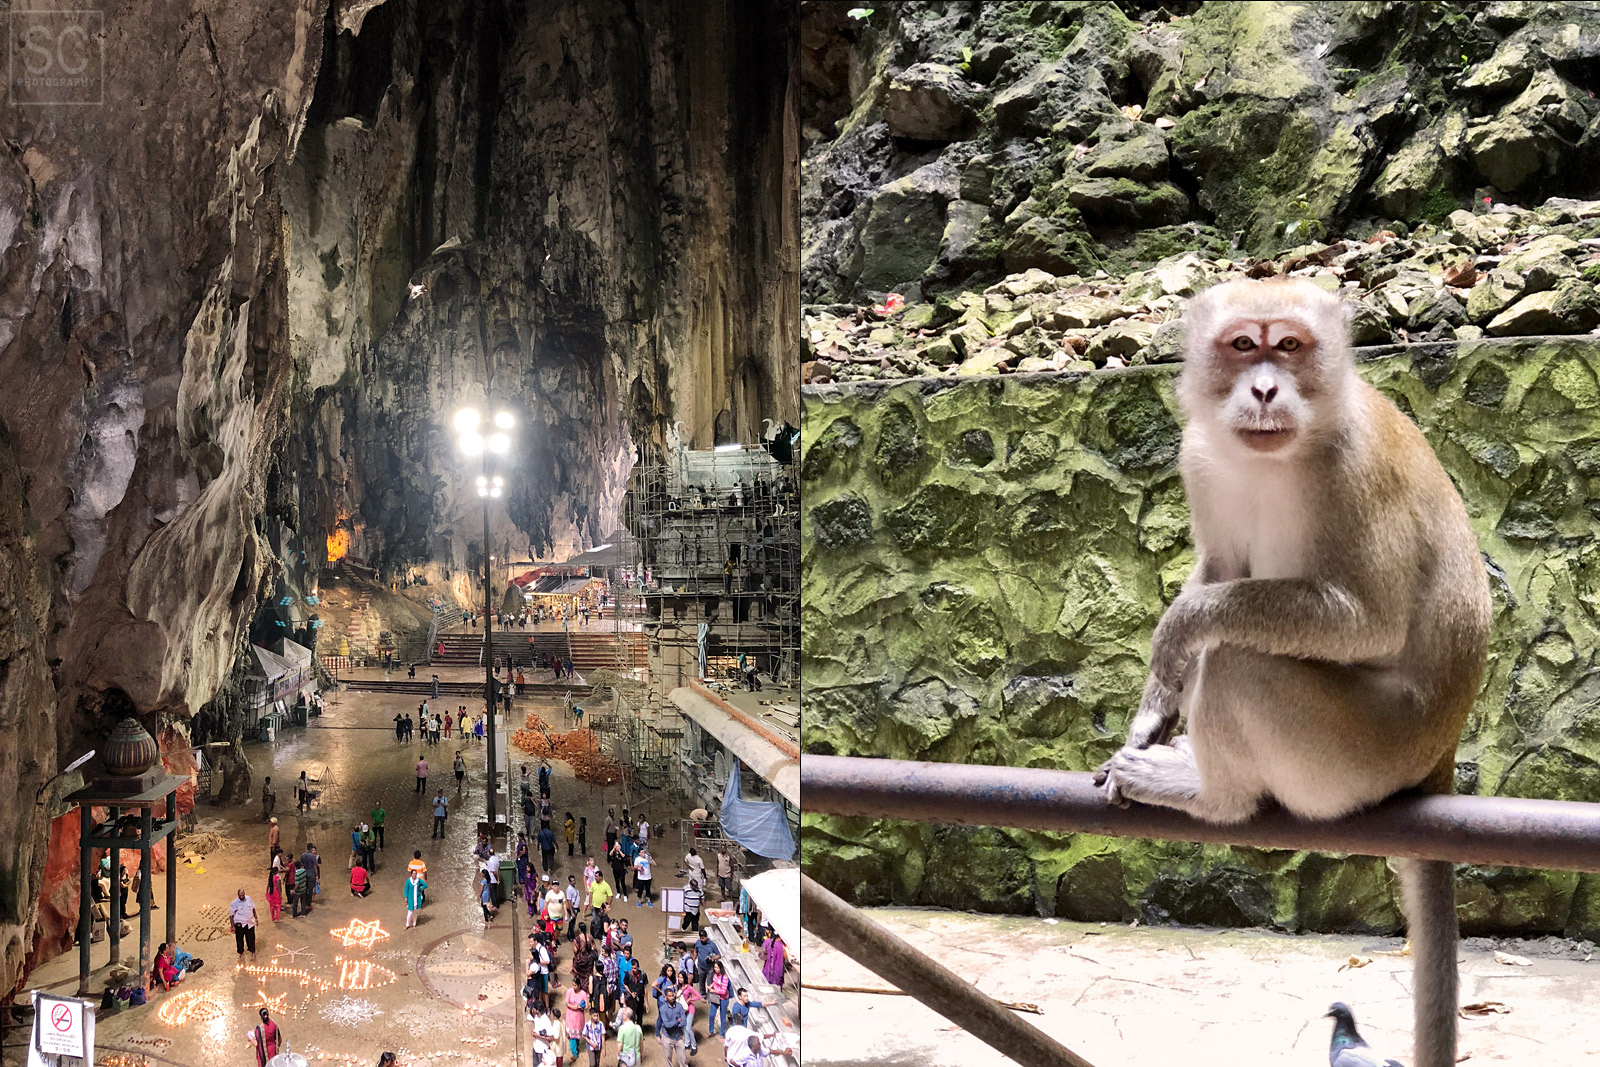 The caves are infested with monkeys ready to steal any food they see. 